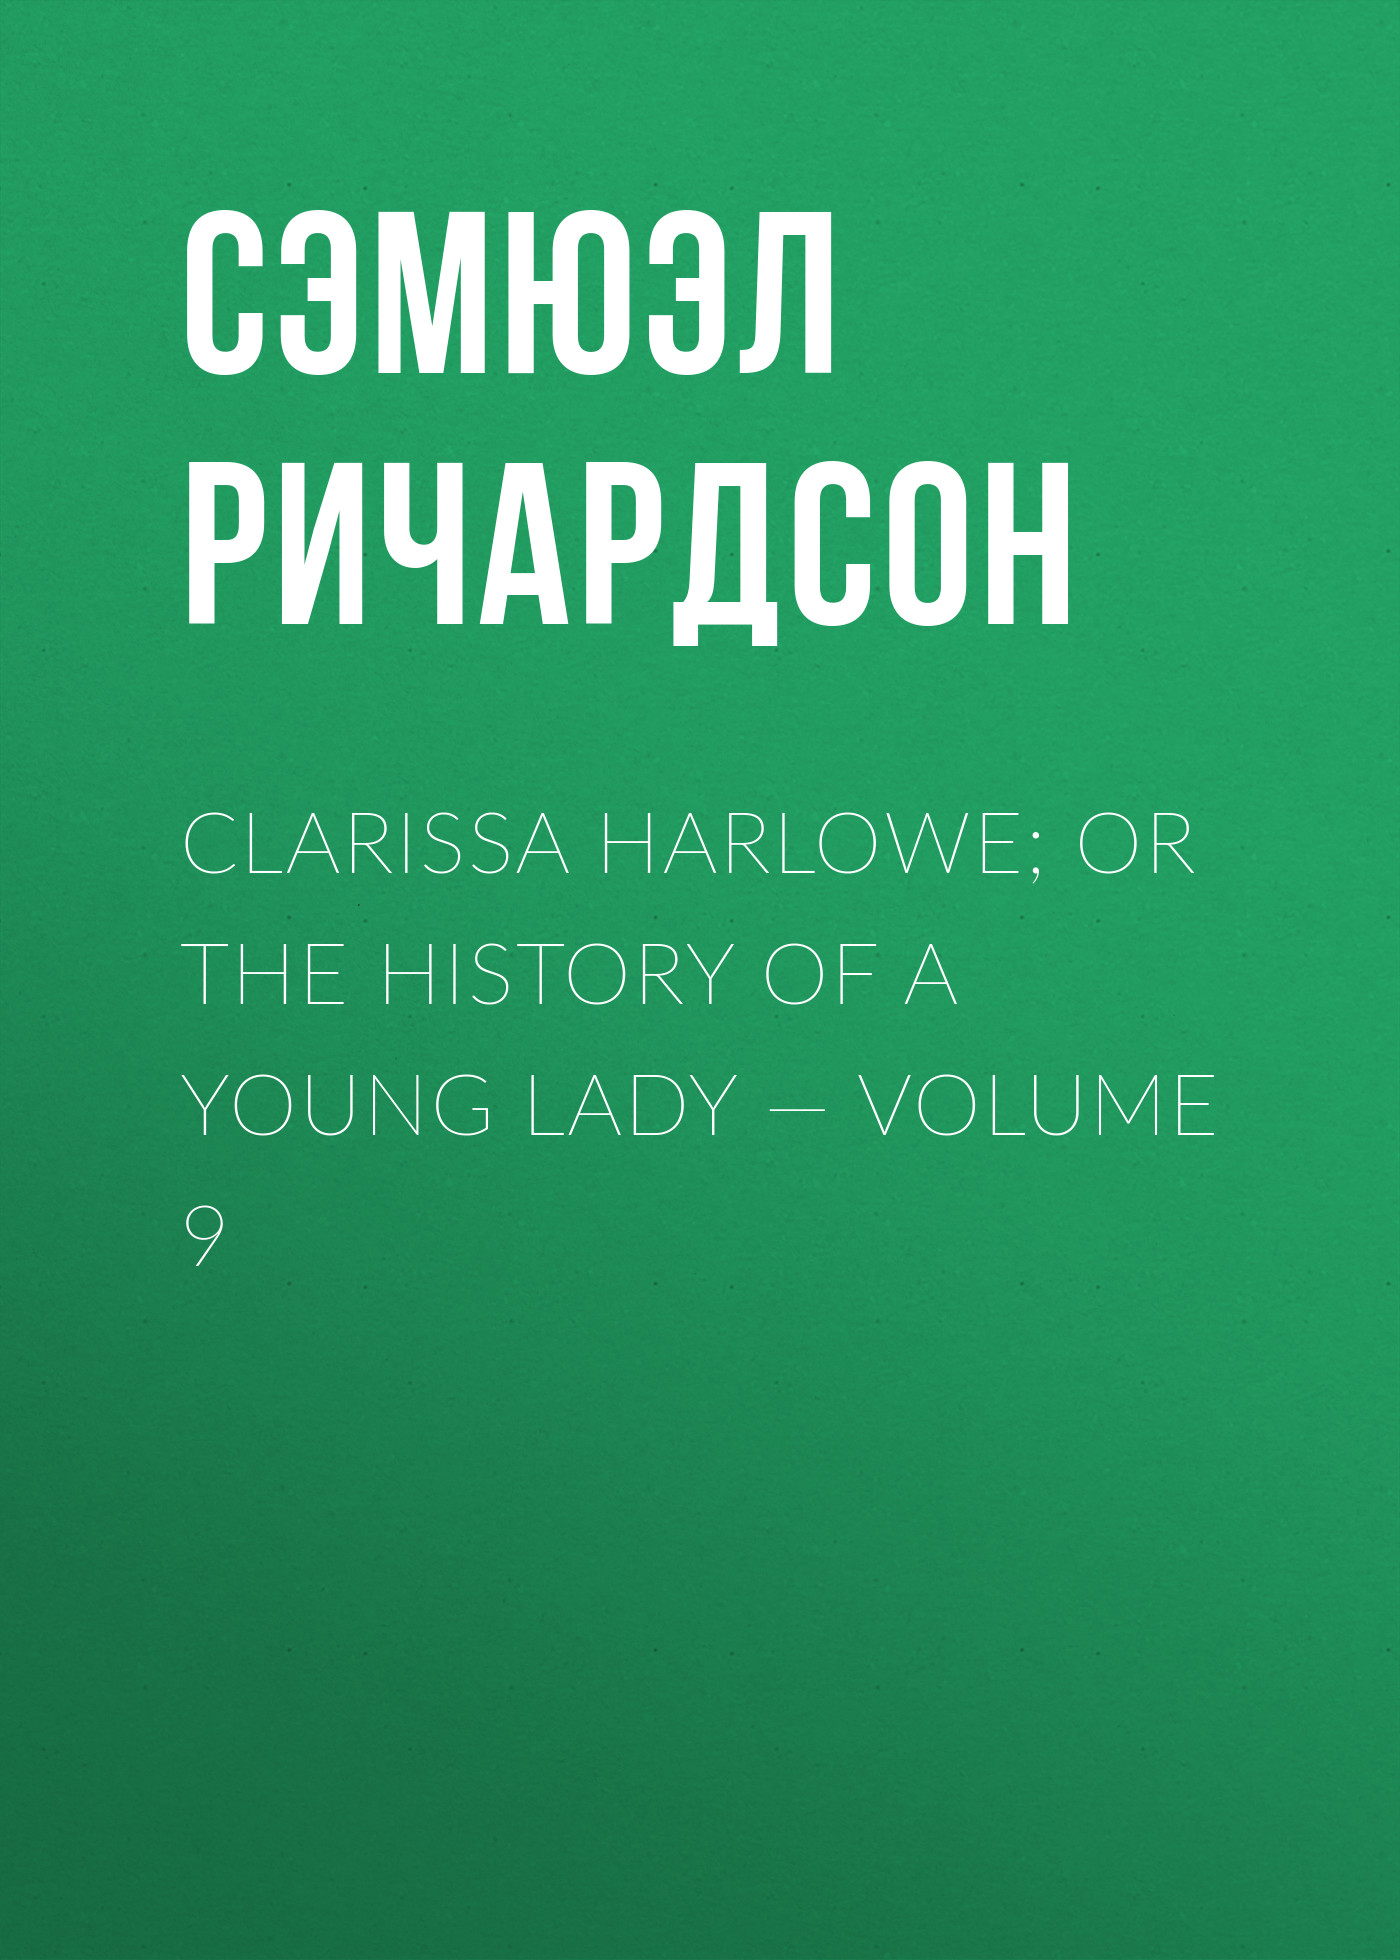 Clarissa Harlowe; or the history of a young lady— Volume 9